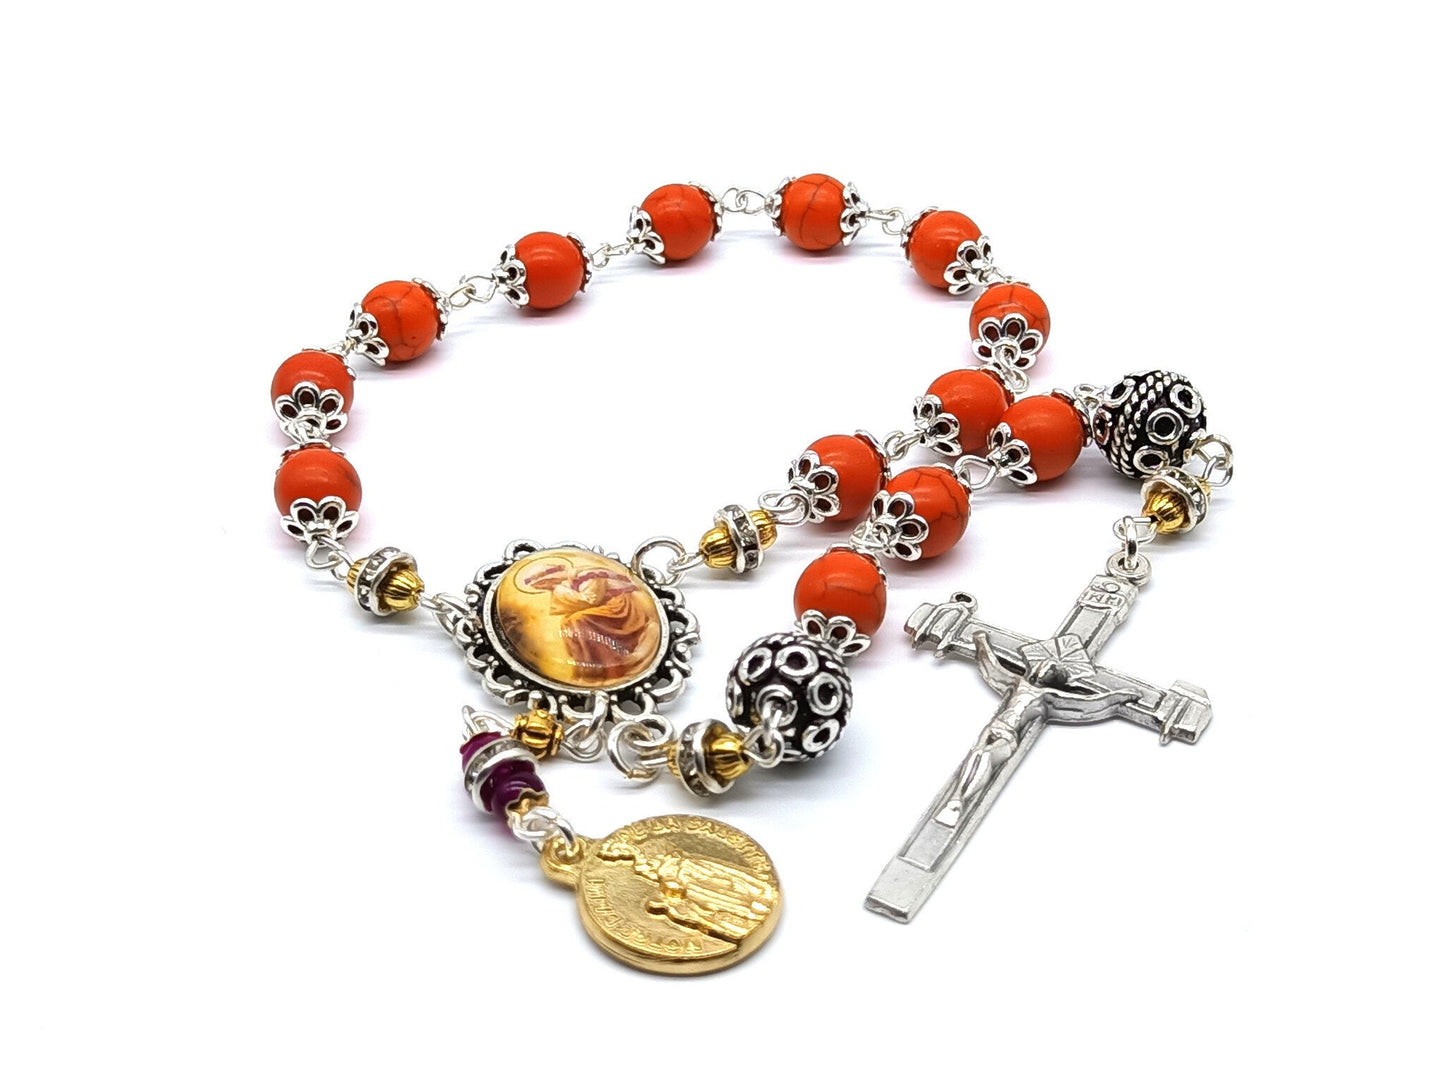 Our lady of La Salette unique rosary beads single decade with gemstone beads, silver crucifix, pater beads and La Salette centre medal.